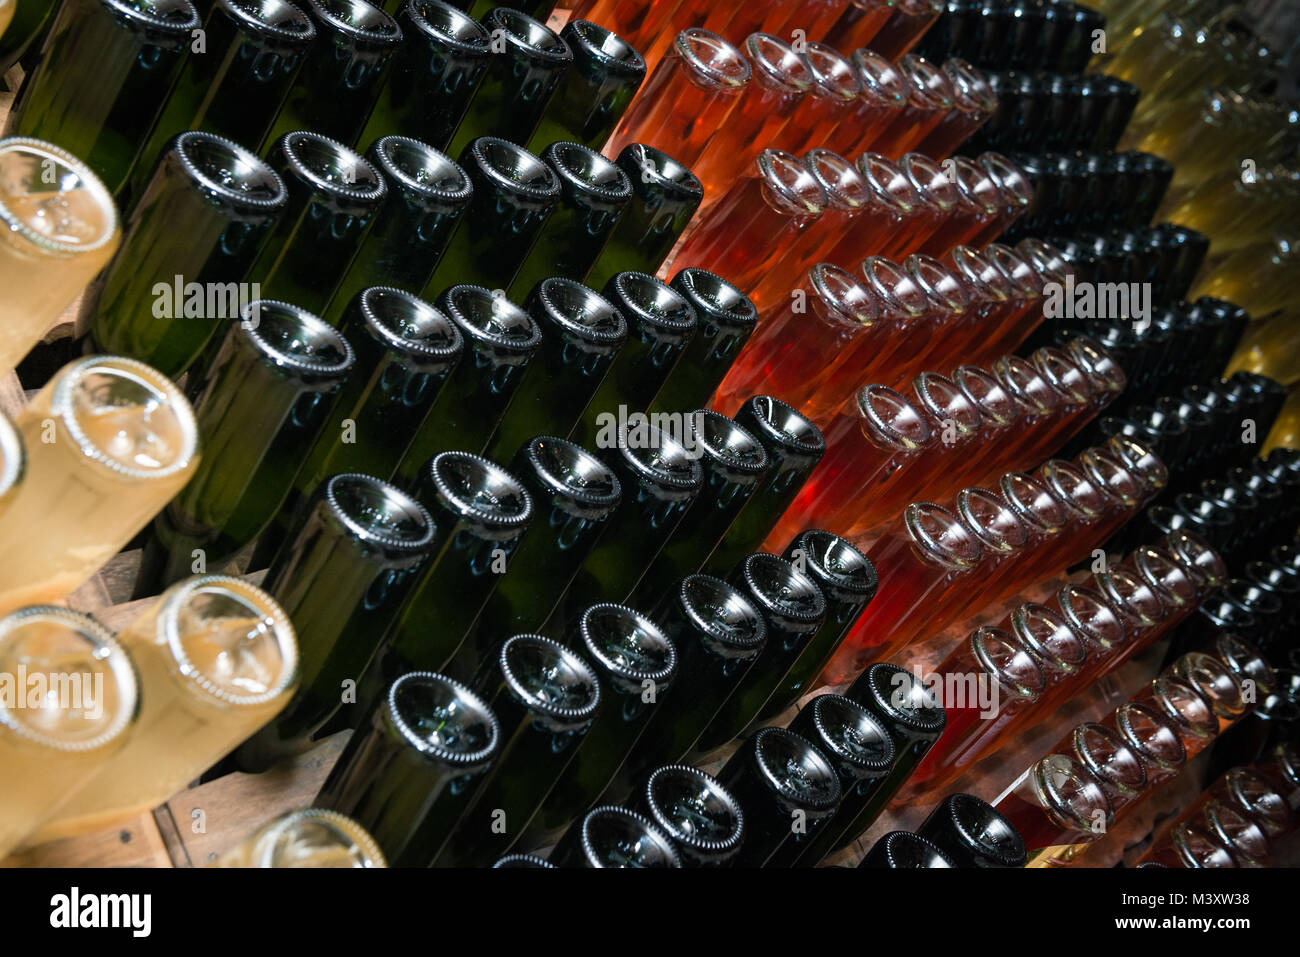 Sparkling wine bottles fermenting in winery Stock Photo